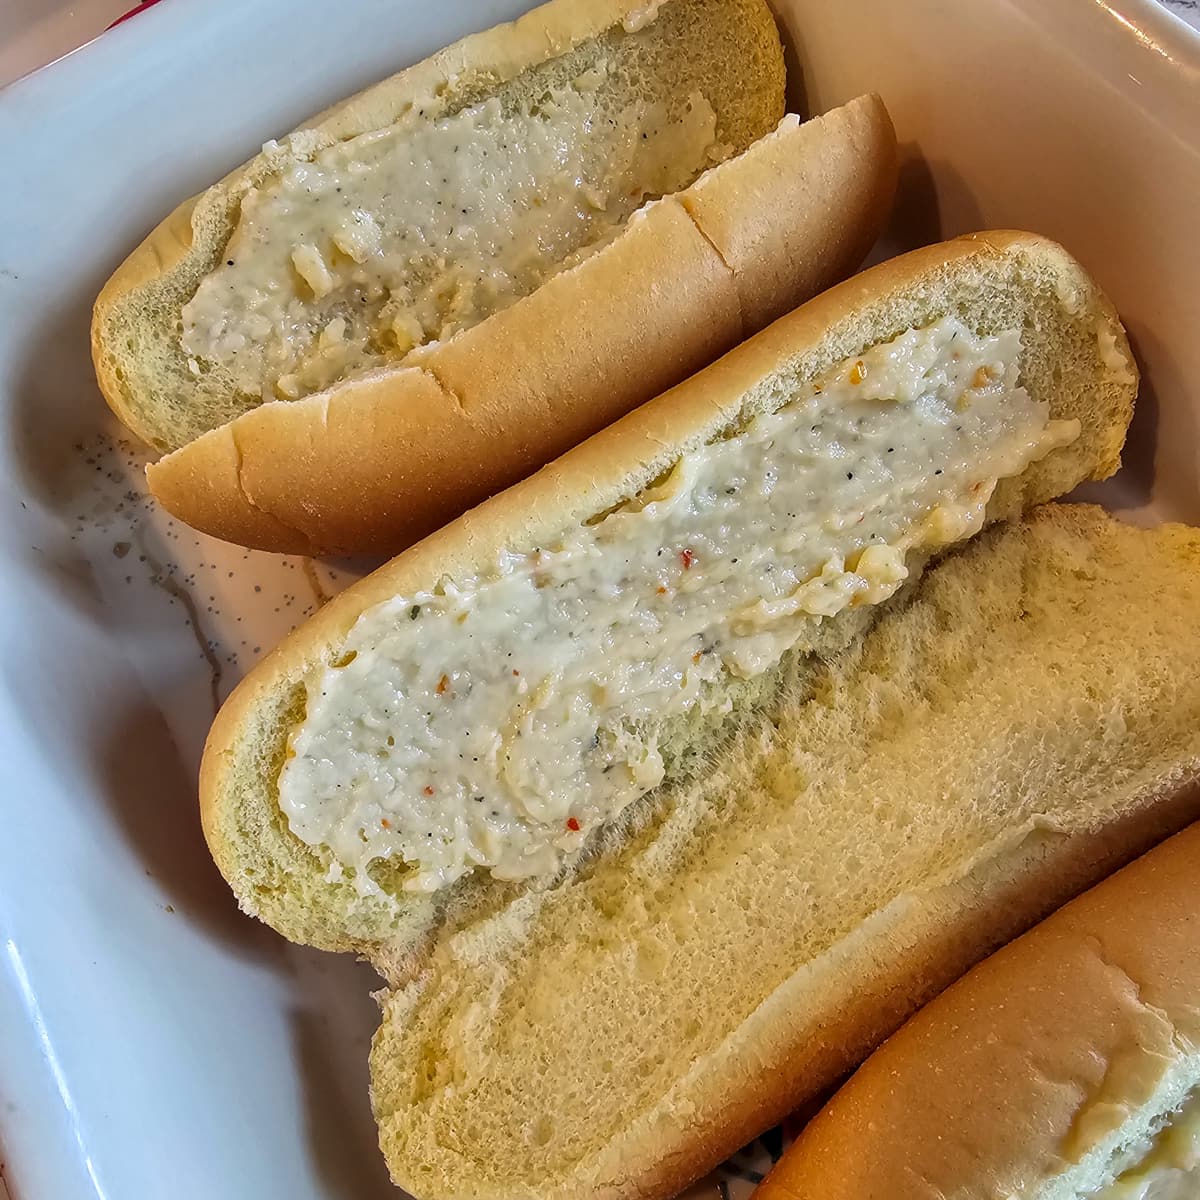 Sub rolls with garlic butter.